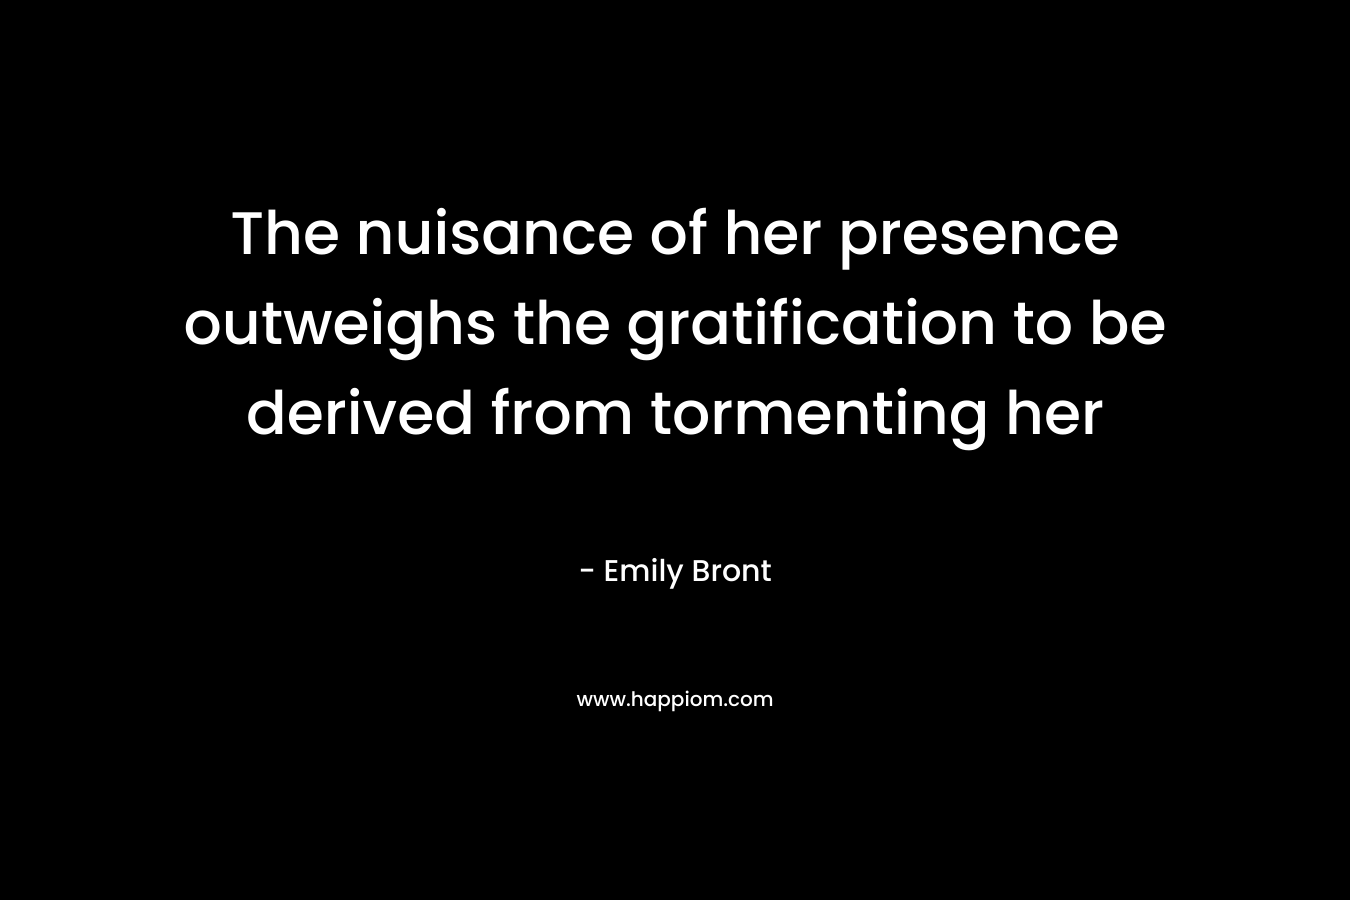 The nuisance of her presence outweighs the gratification to be derived from tormenting her – Emily Bront